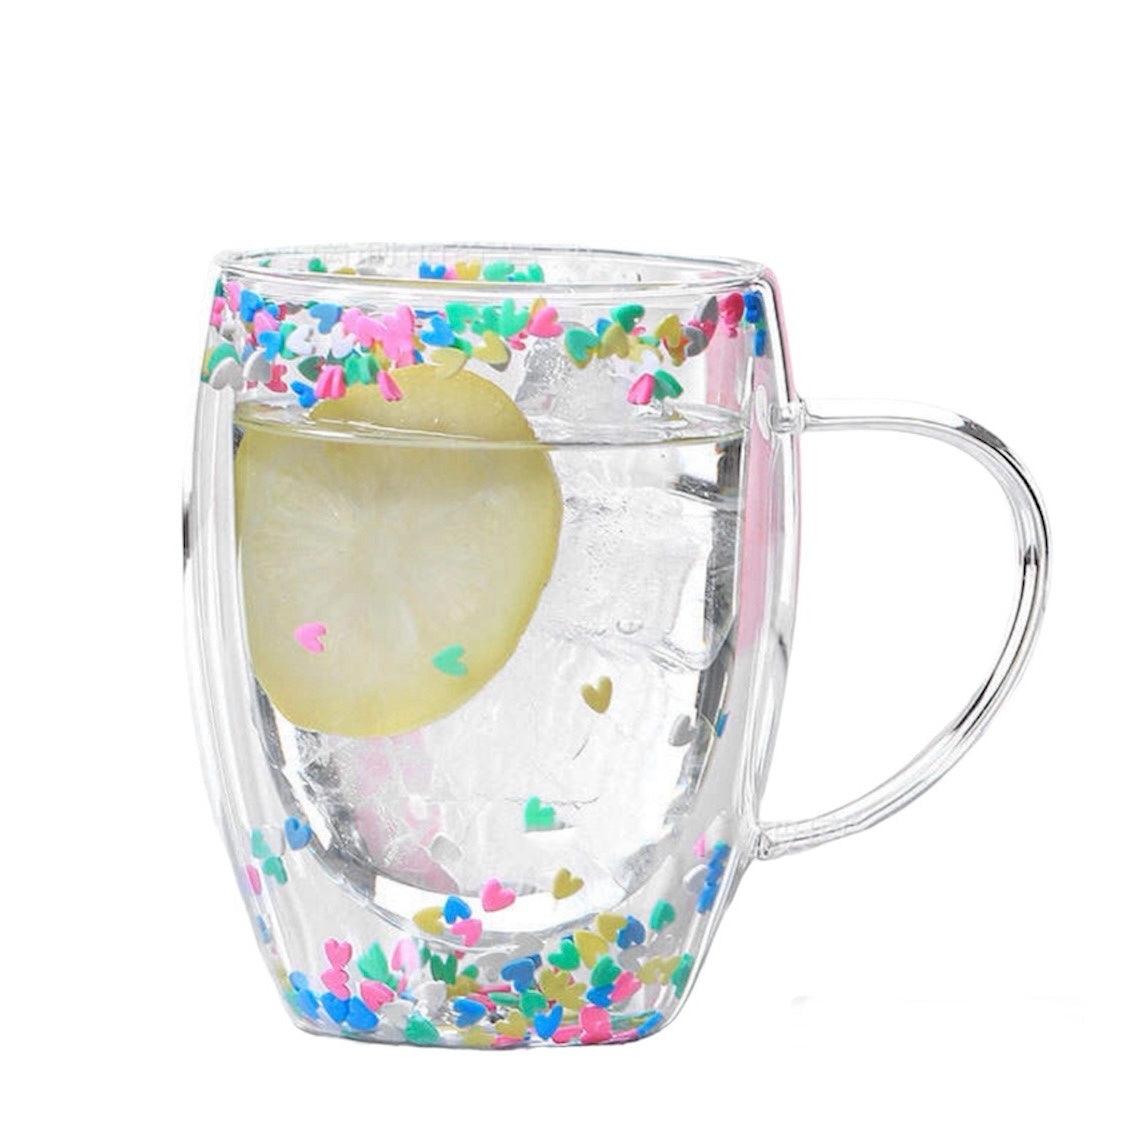 Confetti Heart Mug, shop the best gift gifts for her for him from Inna carton online store dubai, UAE!